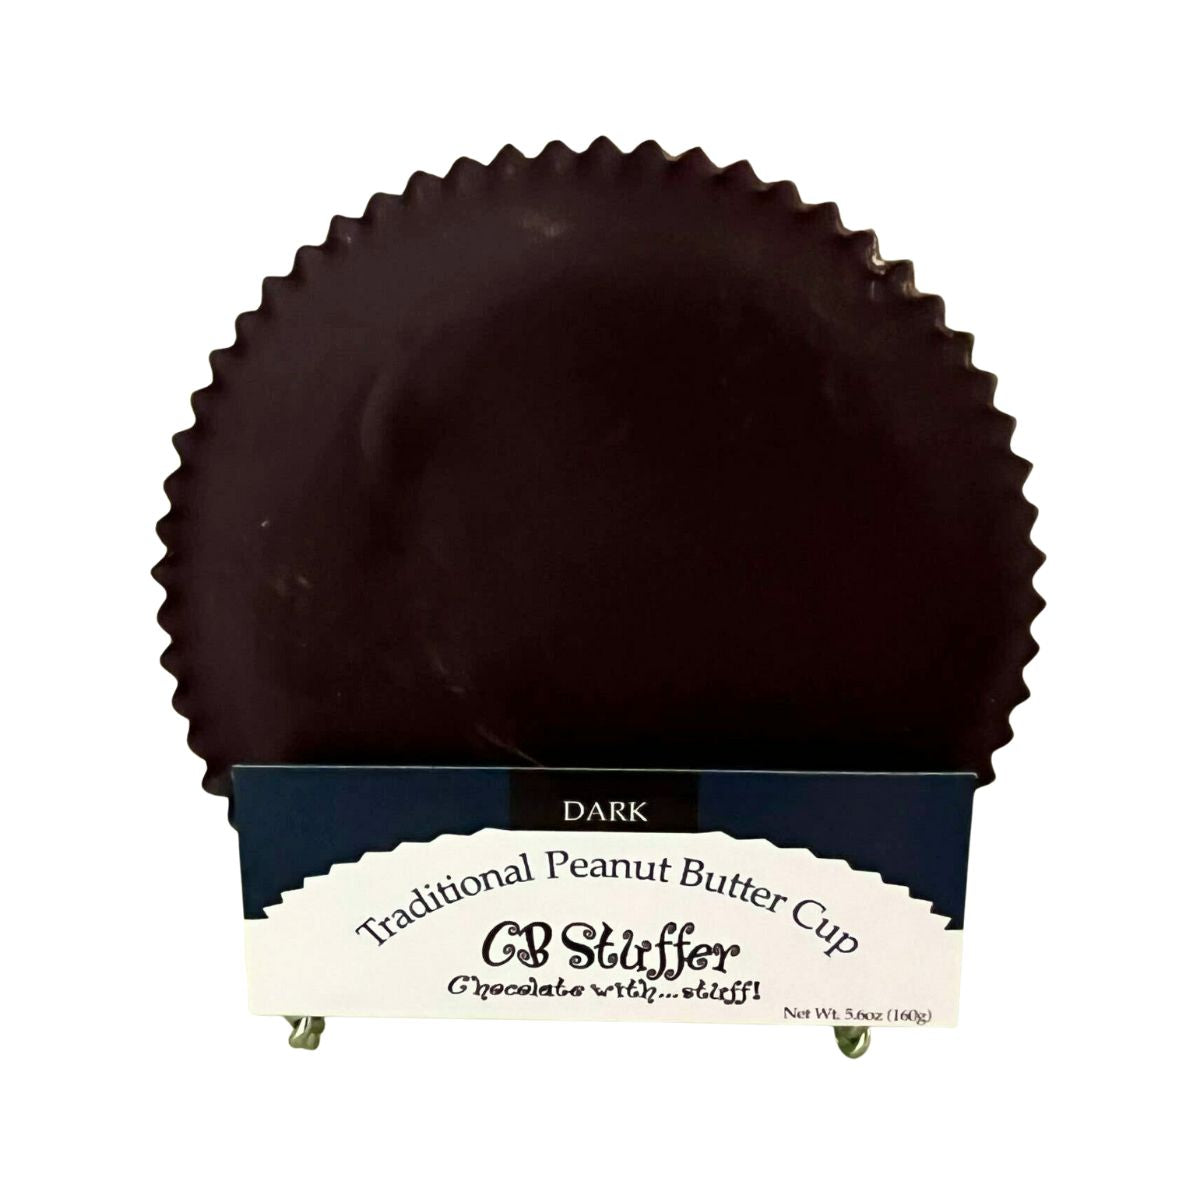 dark chocolate peanut butter cup, olive and basket, cb stuffer